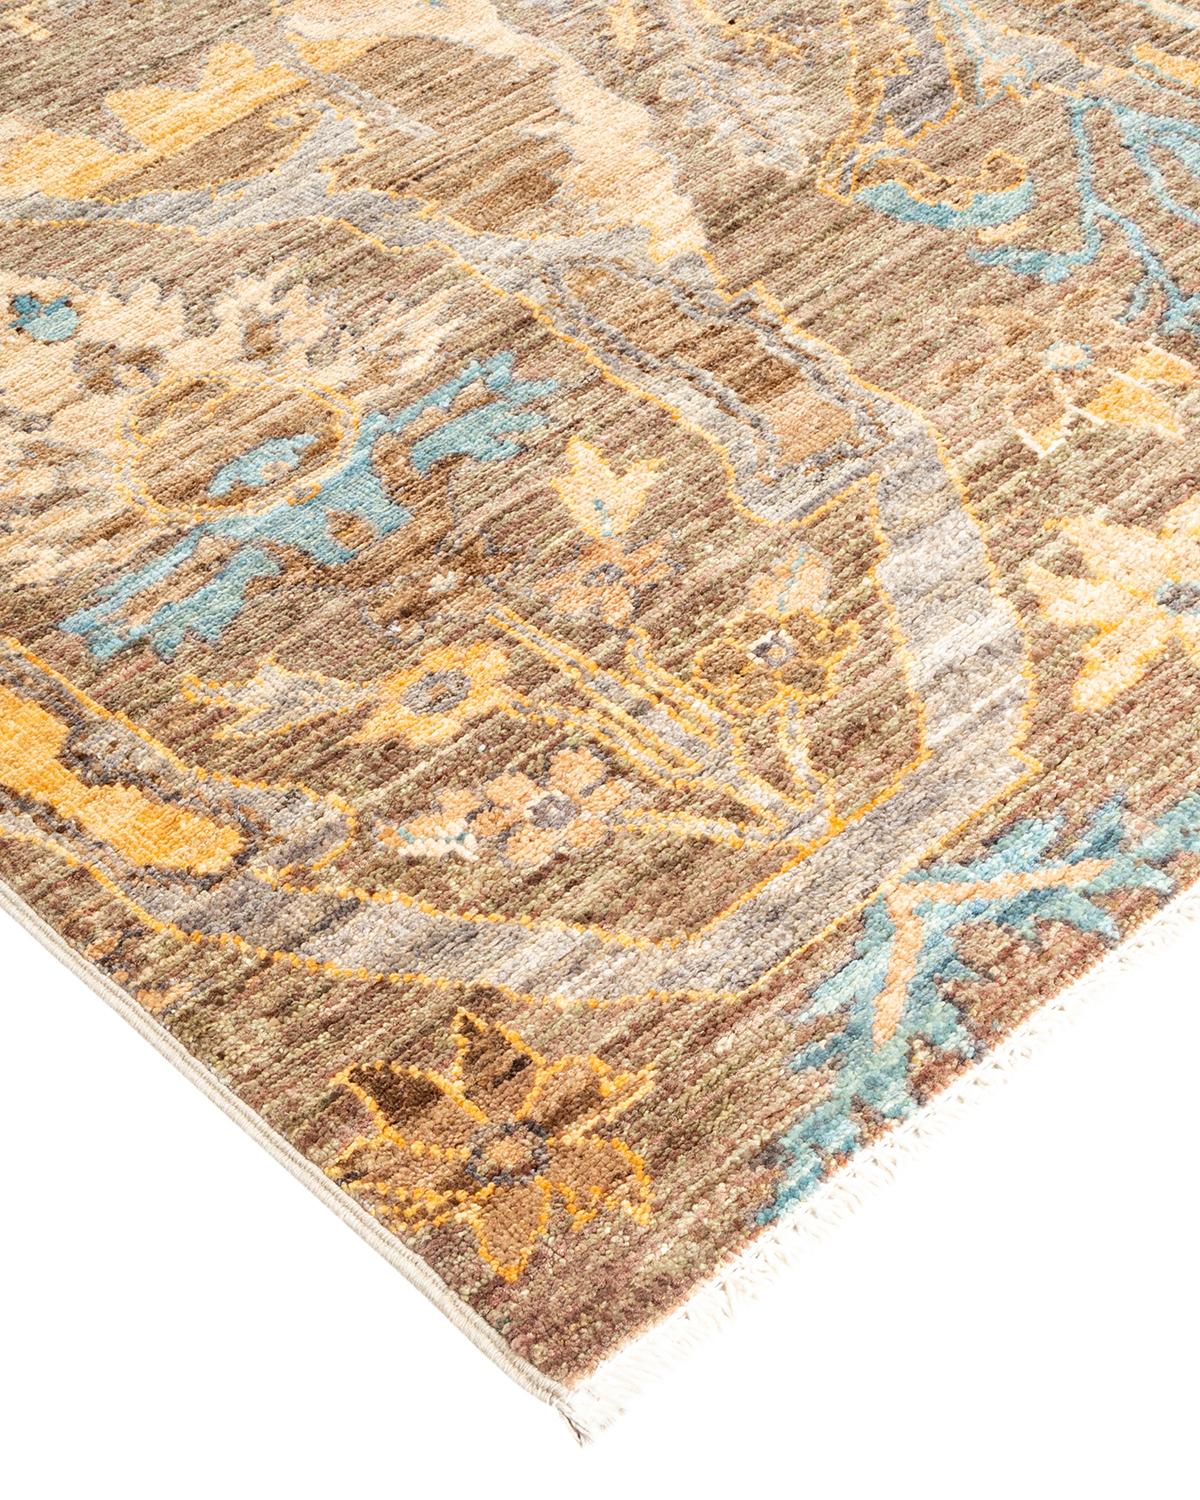 The rich textile tradition of western Africa inspired the Tribal collection of Hand-Knotted rugs. Incorporating a medley of geometric motifs, in palettes ranging from earthy to vivacious, these rugs bring a sense of energy as well as plush texture